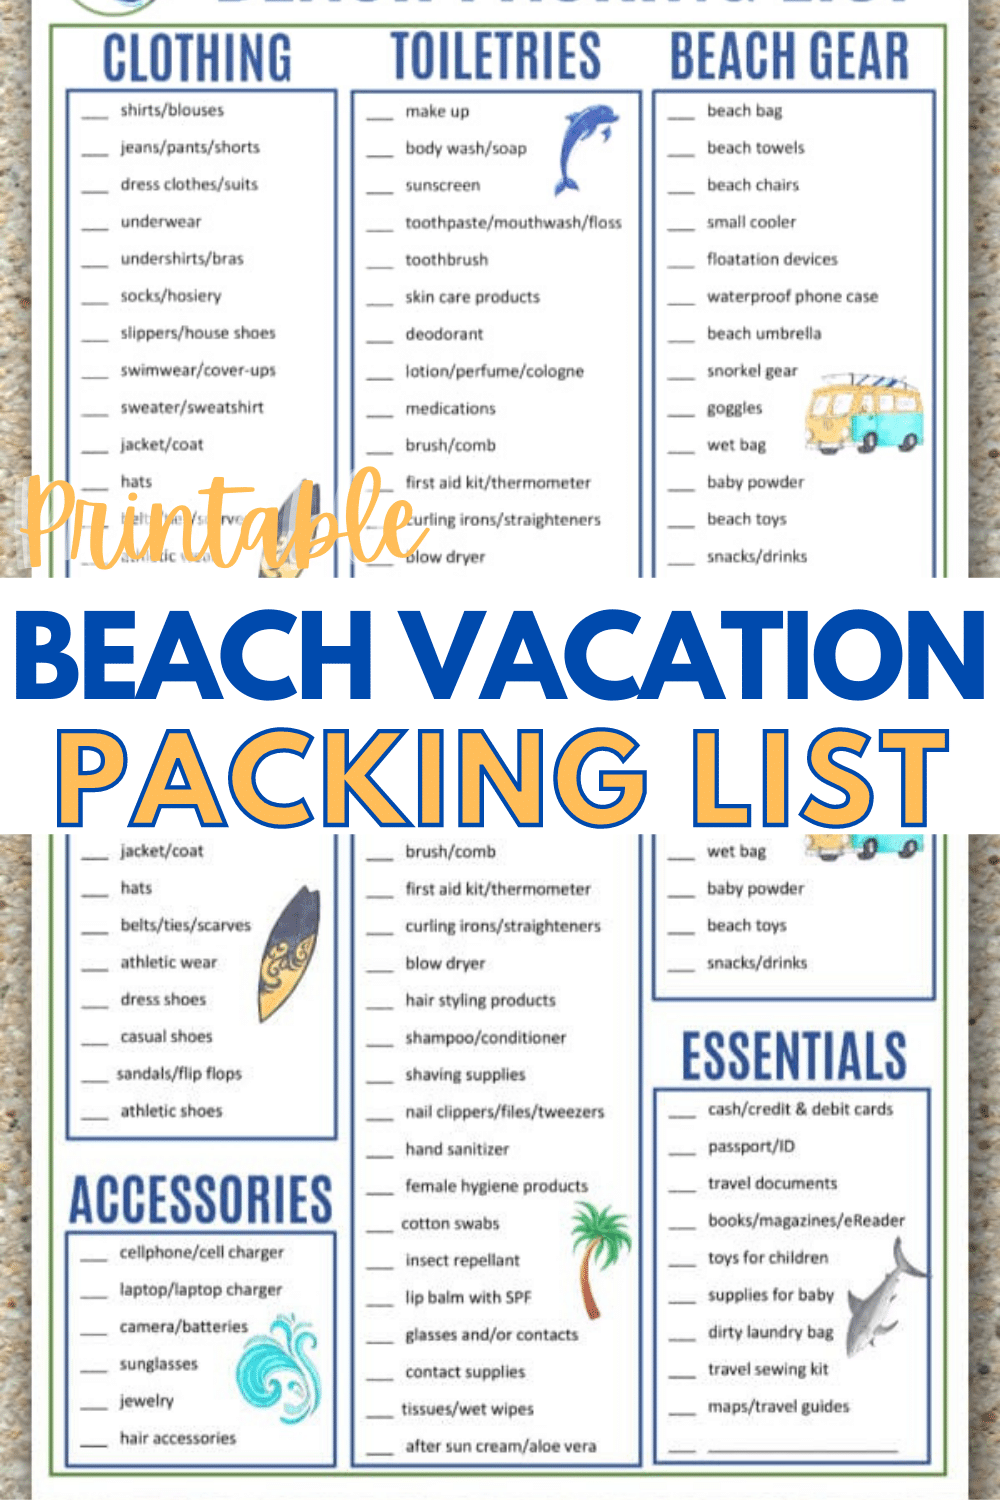 A beach packing list will help you stay organized for a beach vacation. This printable beach packing list covers what you may need for a day at the beach. #printables #vacation #packinglist via @wondermomwannab